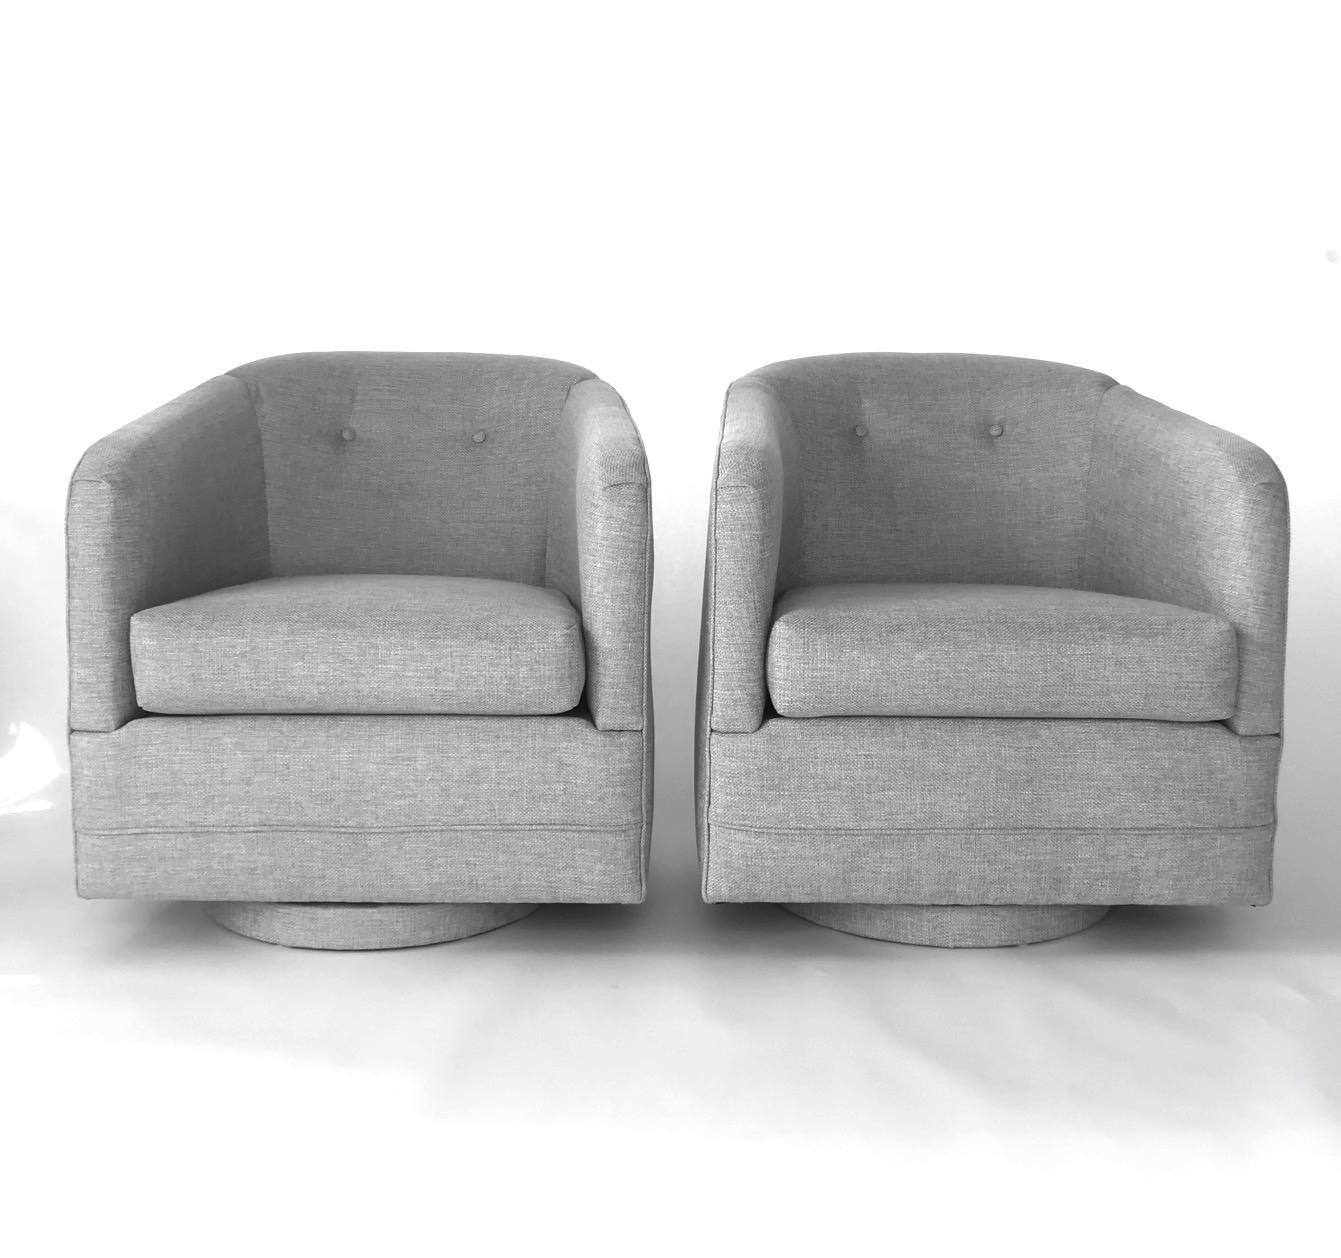 Pair of 1970s Woven Swivel Lounge Chairs by Milo Baughman im Zustand „Hervorragend“ in Fort Lauderdale, FL